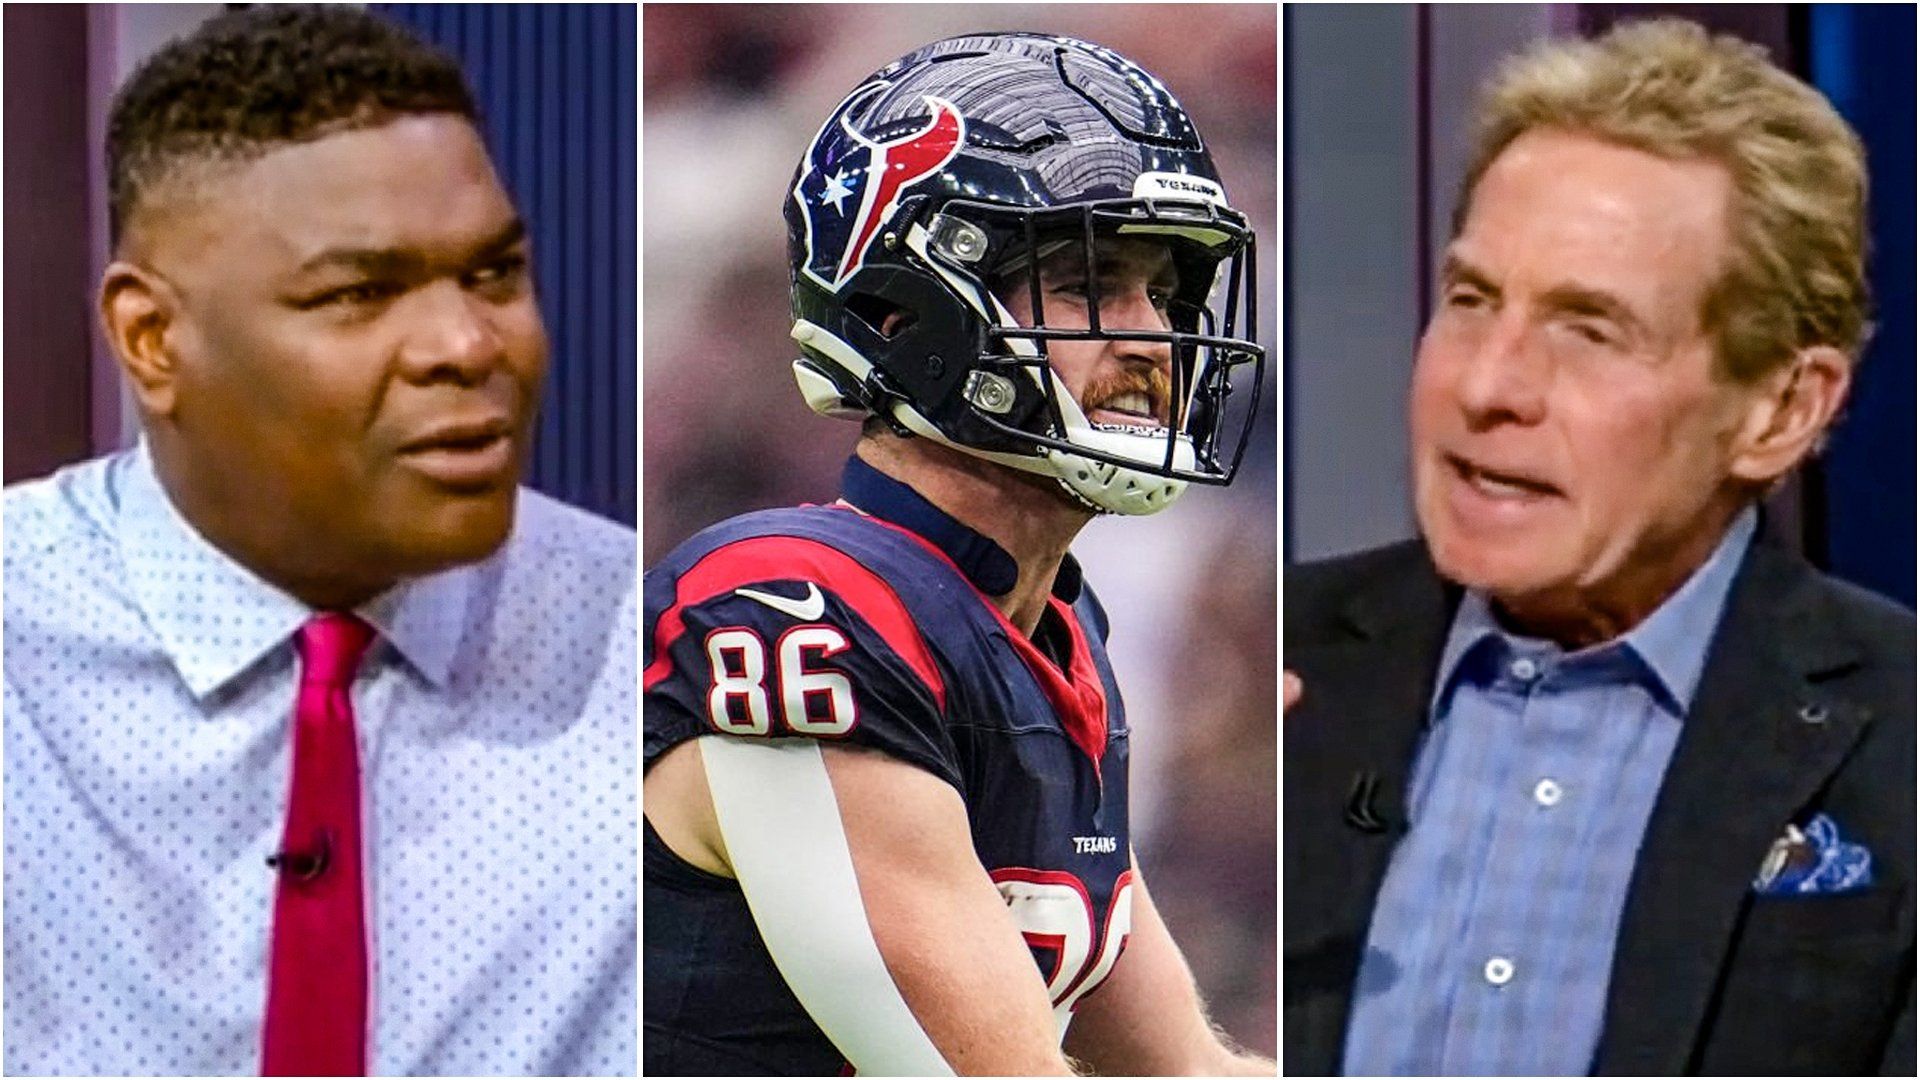 How Fox Sports' rant against Texans player completely misses the point!